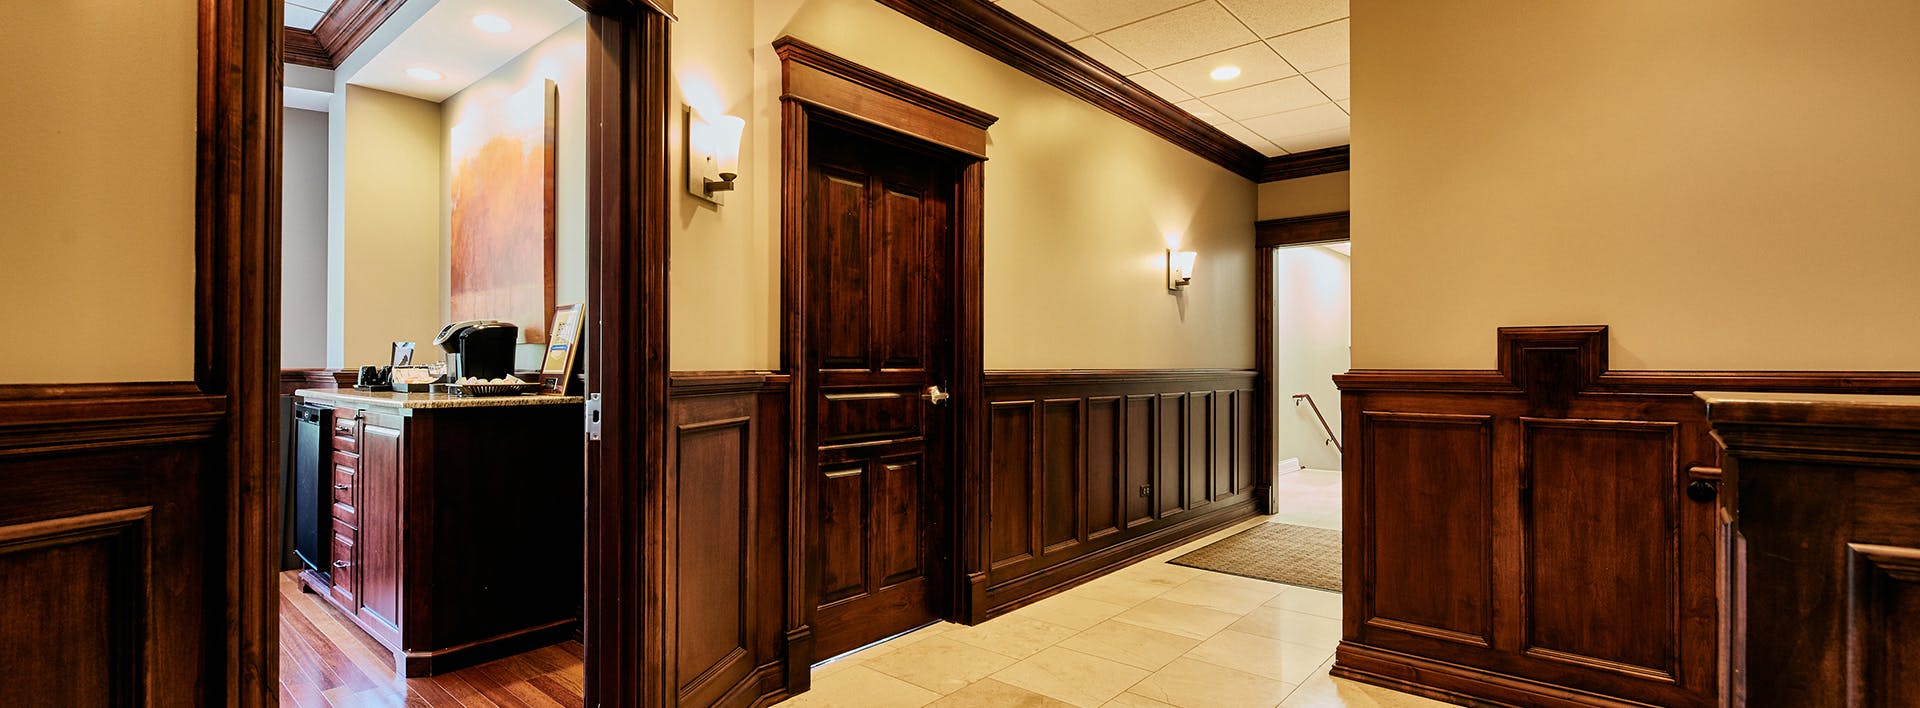 there is a hallway with a wooden paneled wall and a white tiled floor